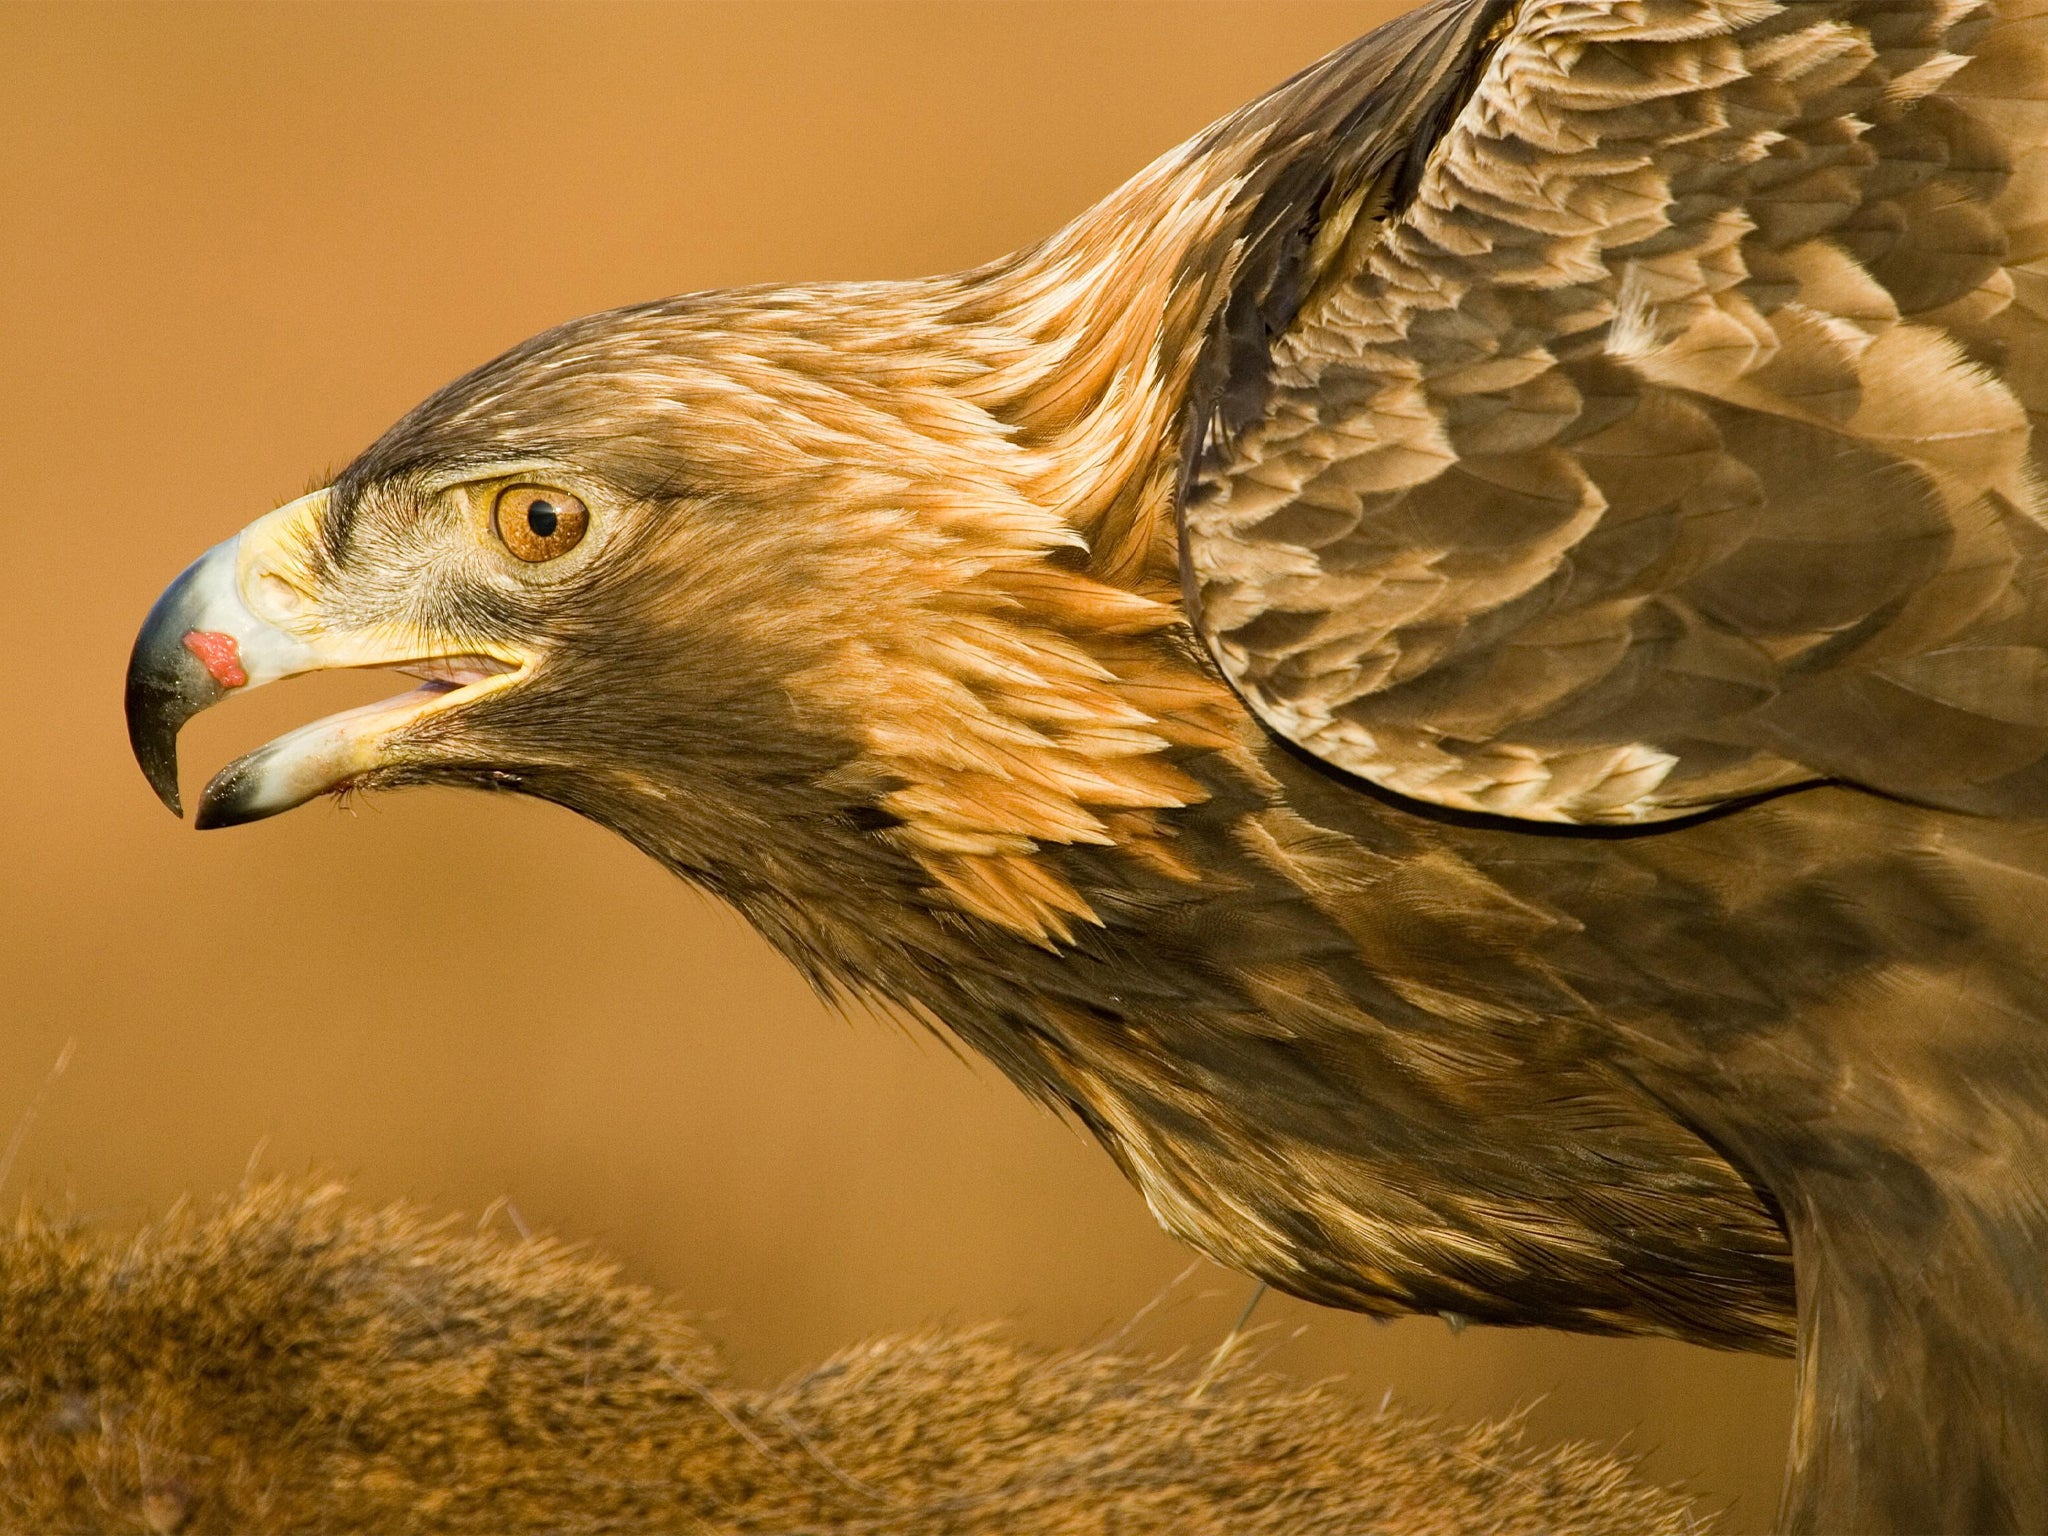 A 2017 study found nearly one third of tagged golden eagles have been killed in suspicious circumstances